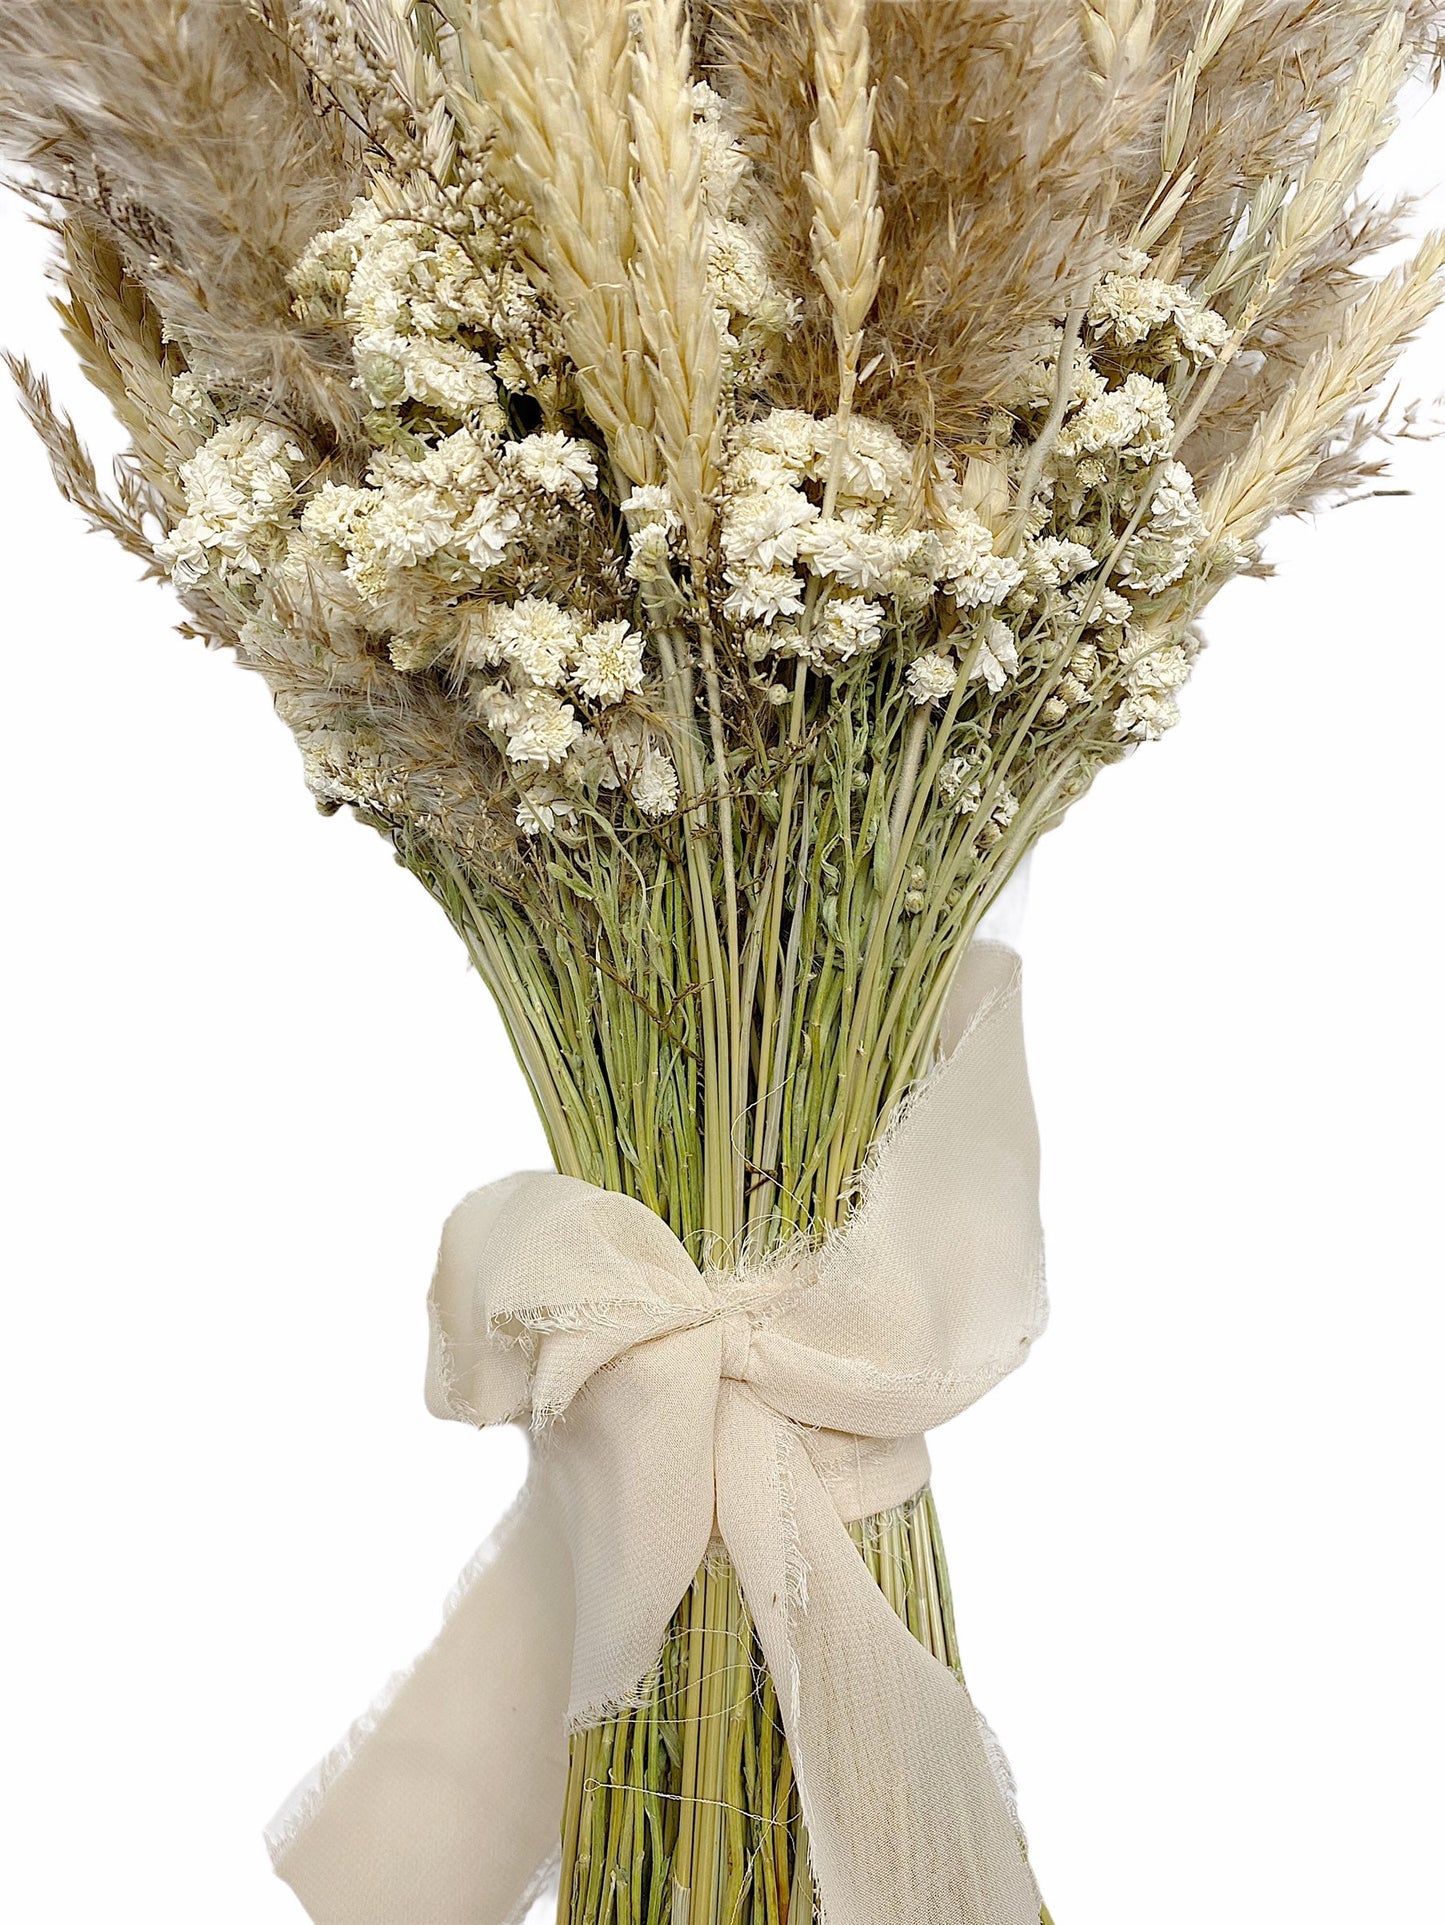 Wedding Bouquet, Dried Flowers, Pampas-grass, Peonies, Floral, Wheat, Fall, Bridal, Preserved, House Decoration, Caspia, Simply Beautiful